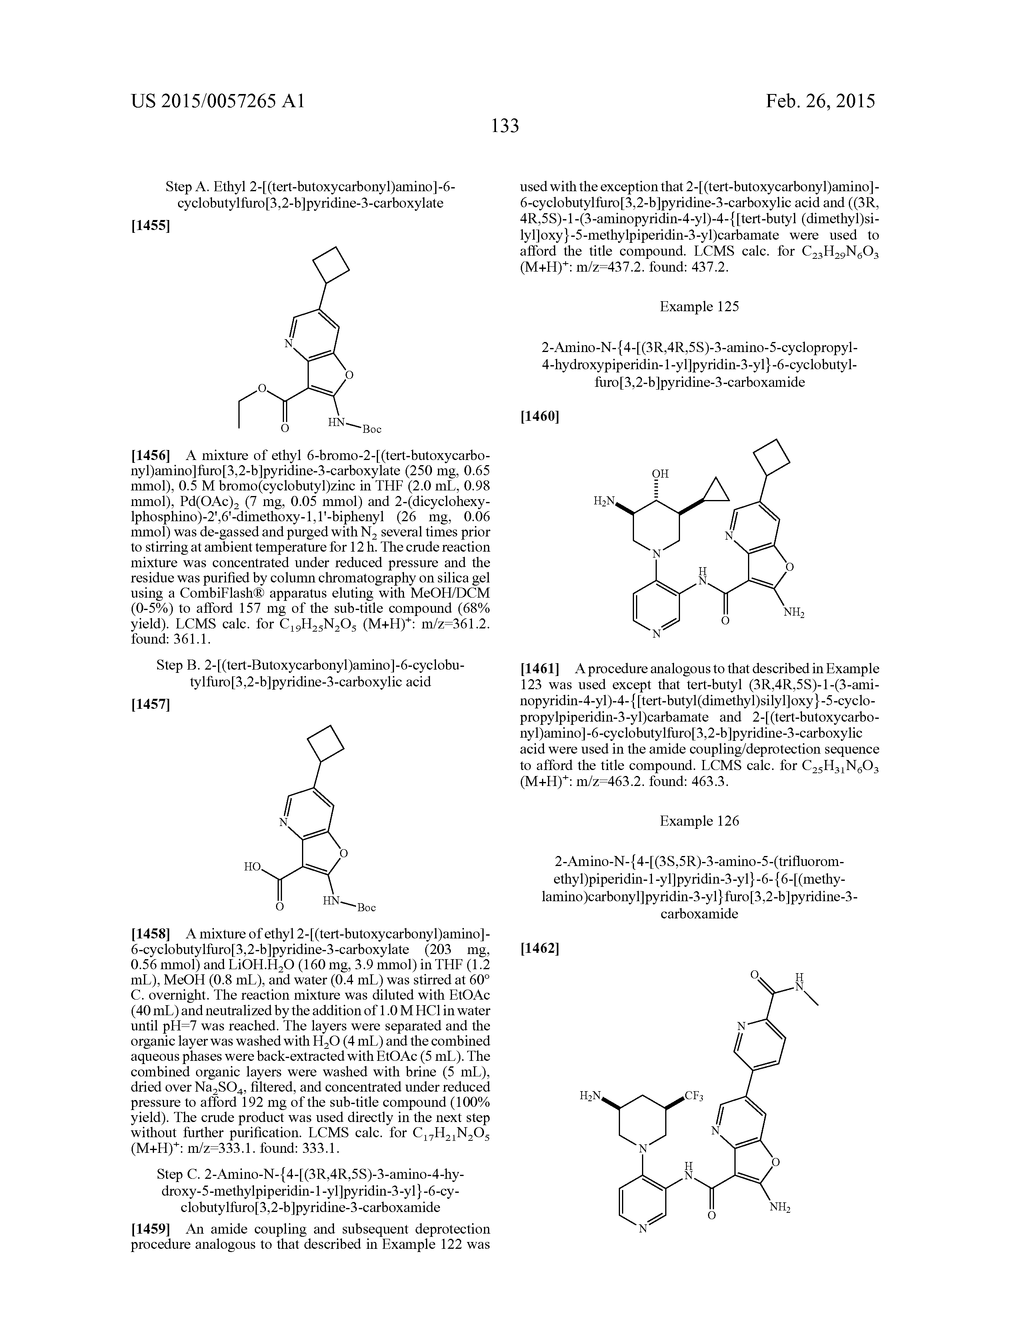 FURO- AND THIENO-PYRIDINE CARBOXAMIDE COMPOUNDS USEFUL AS PIM KINASE     INHIBITORS - diagram, schematic, and image 134